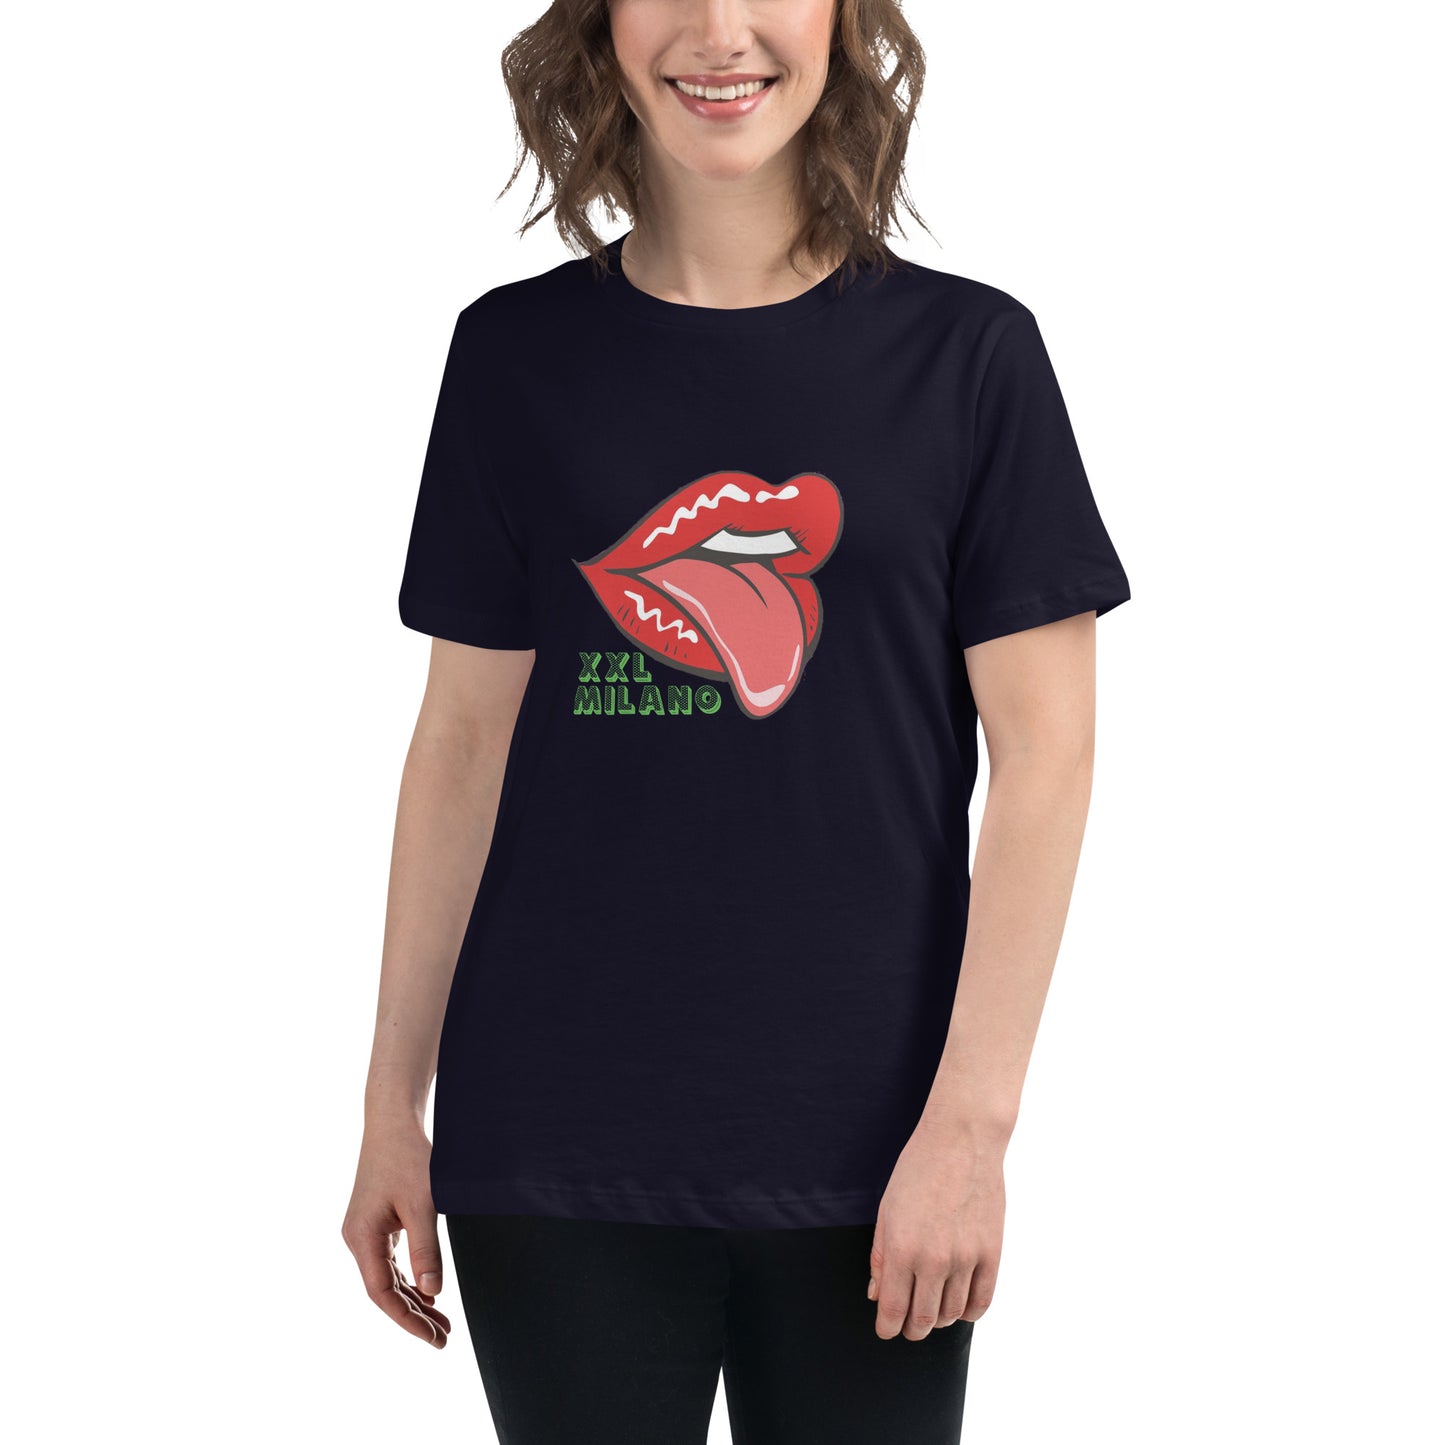 T-shirt relaxed fit donna